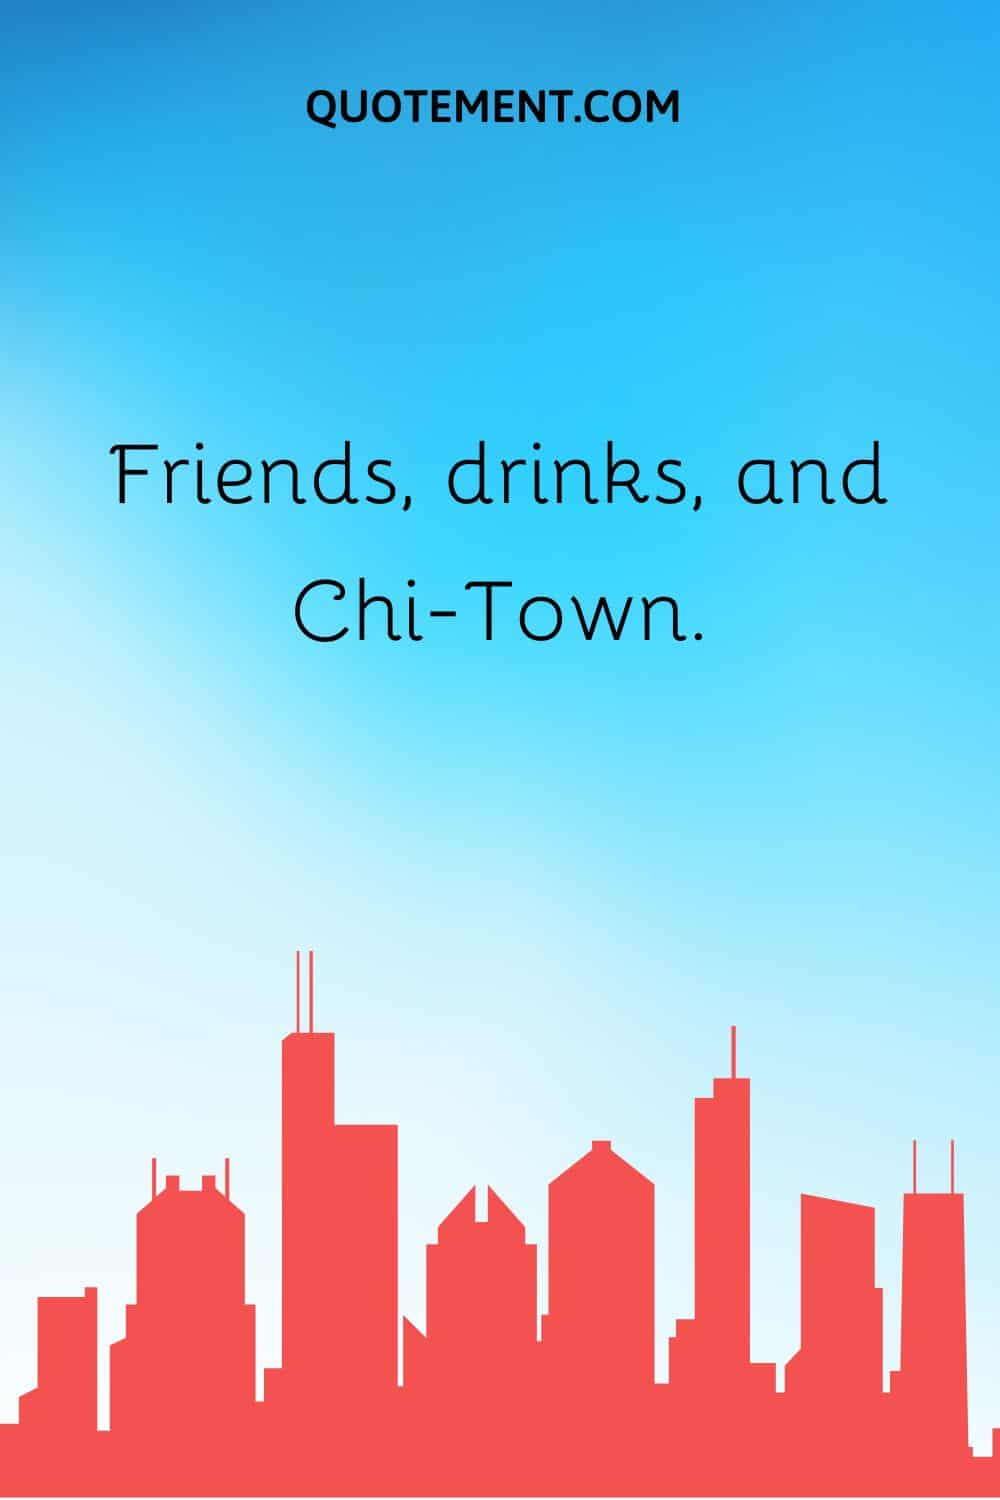 Friends, drinks, and Chi-Town.